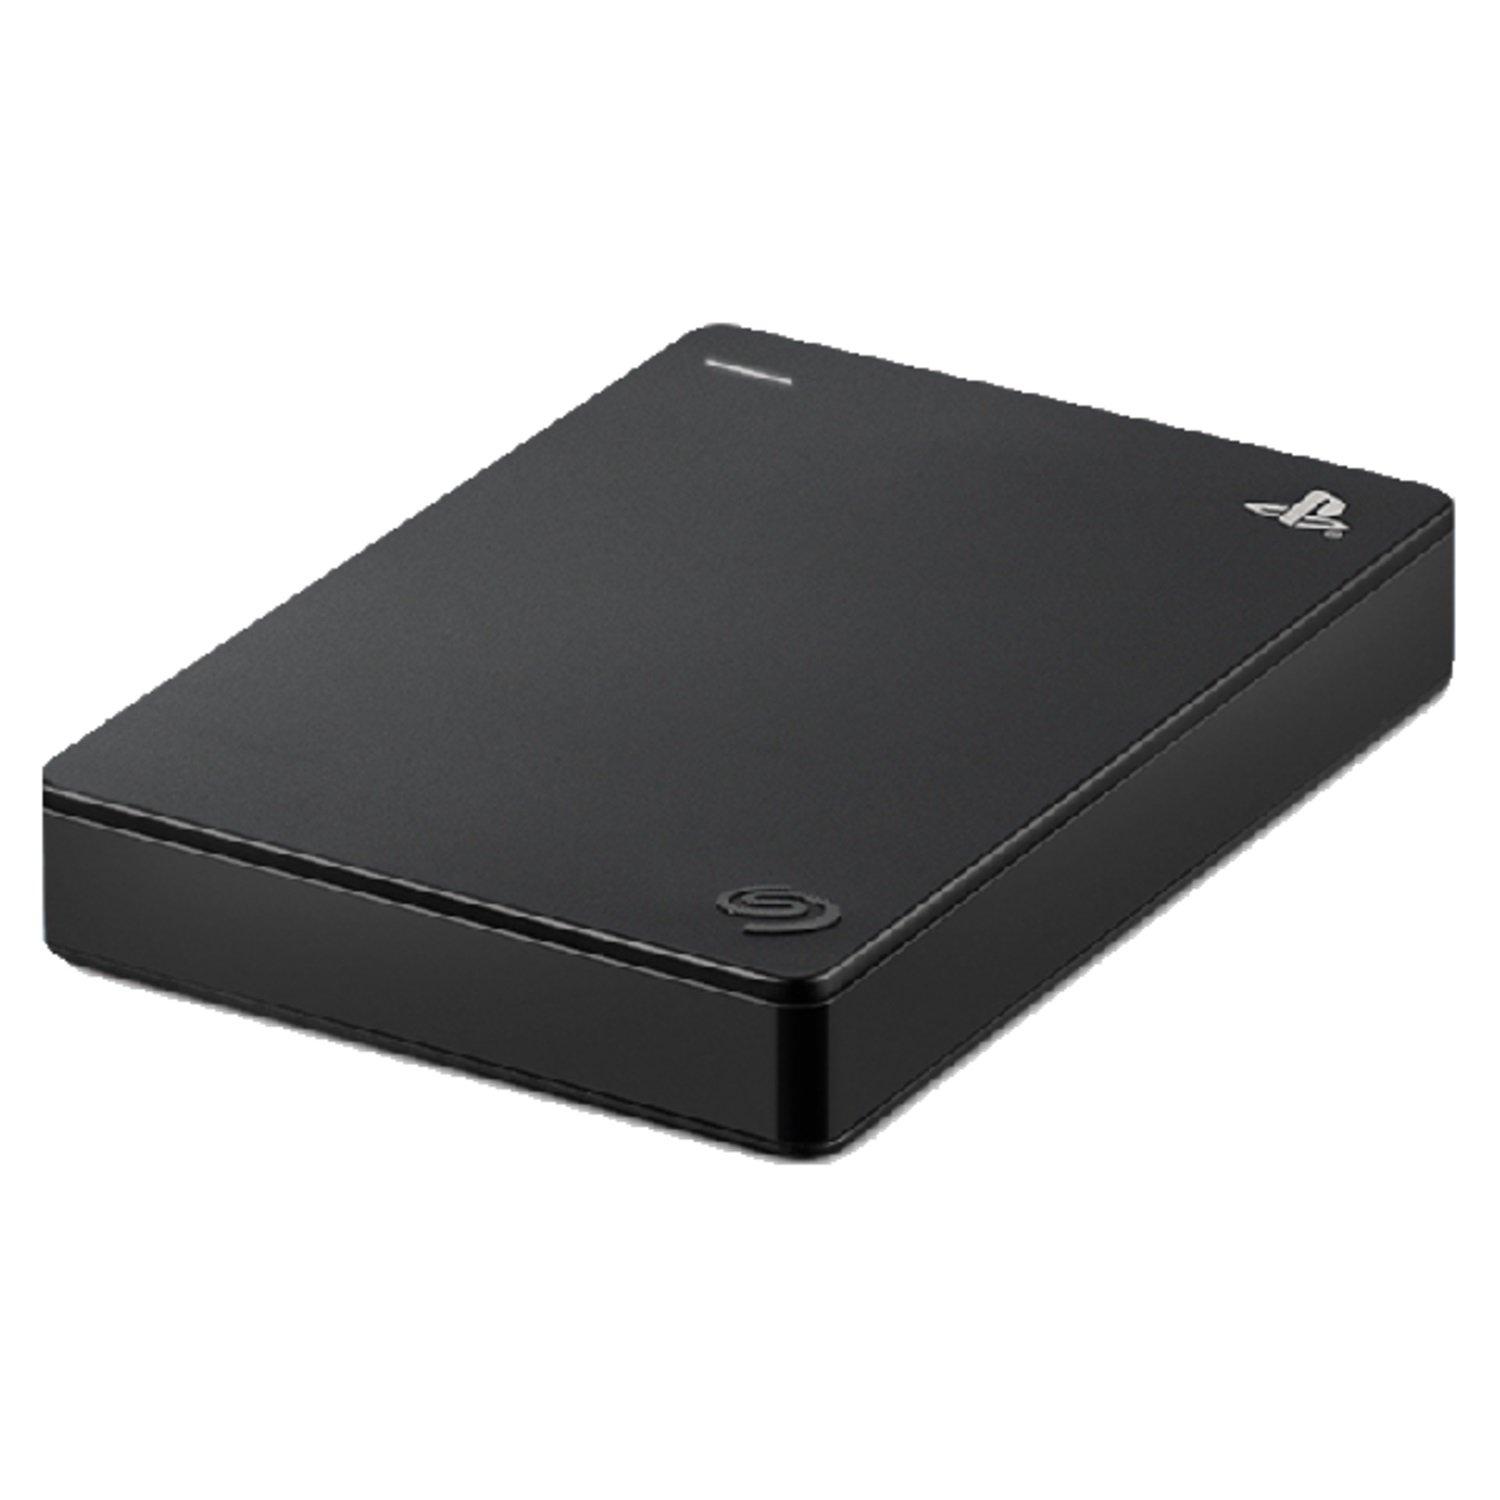 Seagate 4TB Game Drive for Hard PlayStation External | GameStop Drive